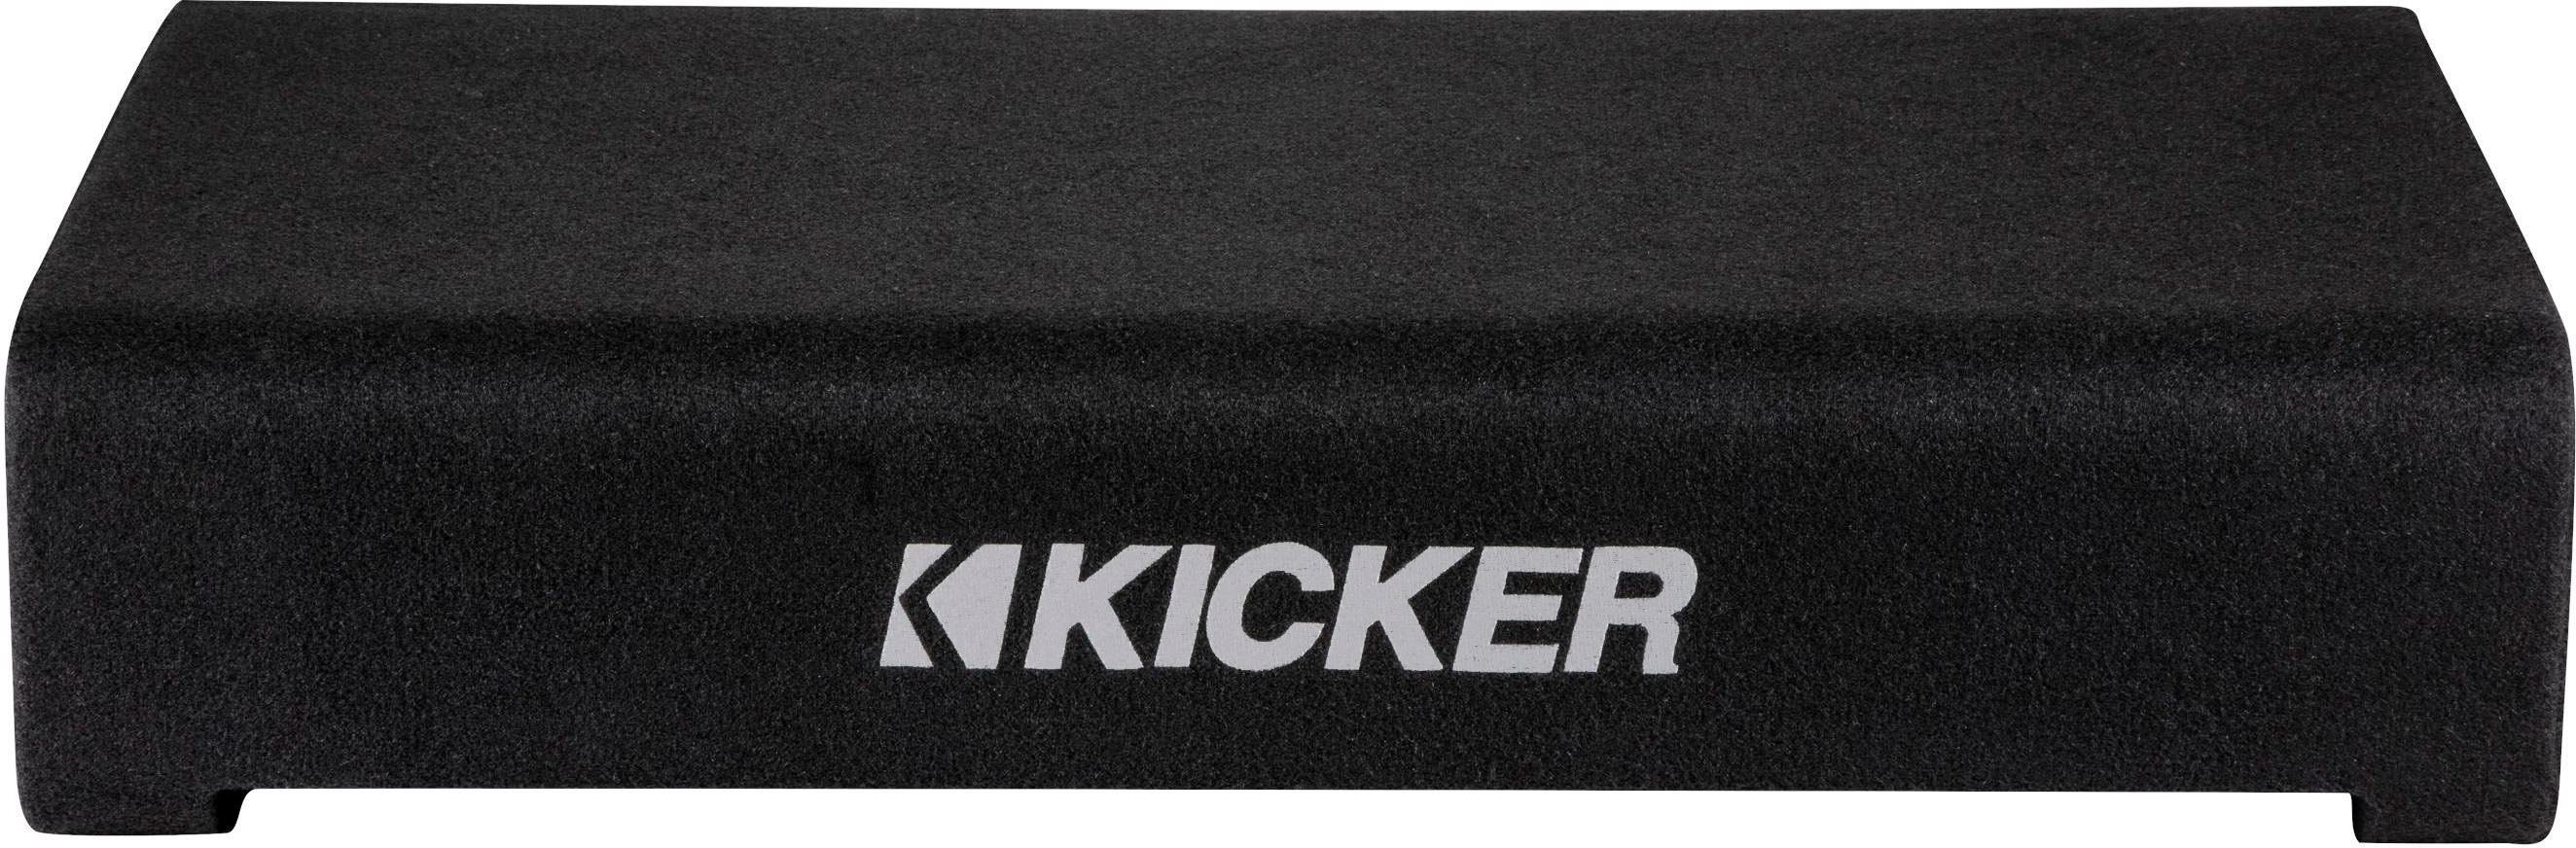 KICKER CompRT Down-Firing 12” Dual-Voice-Coil 2-Ohm Loaded Subwoofer ...